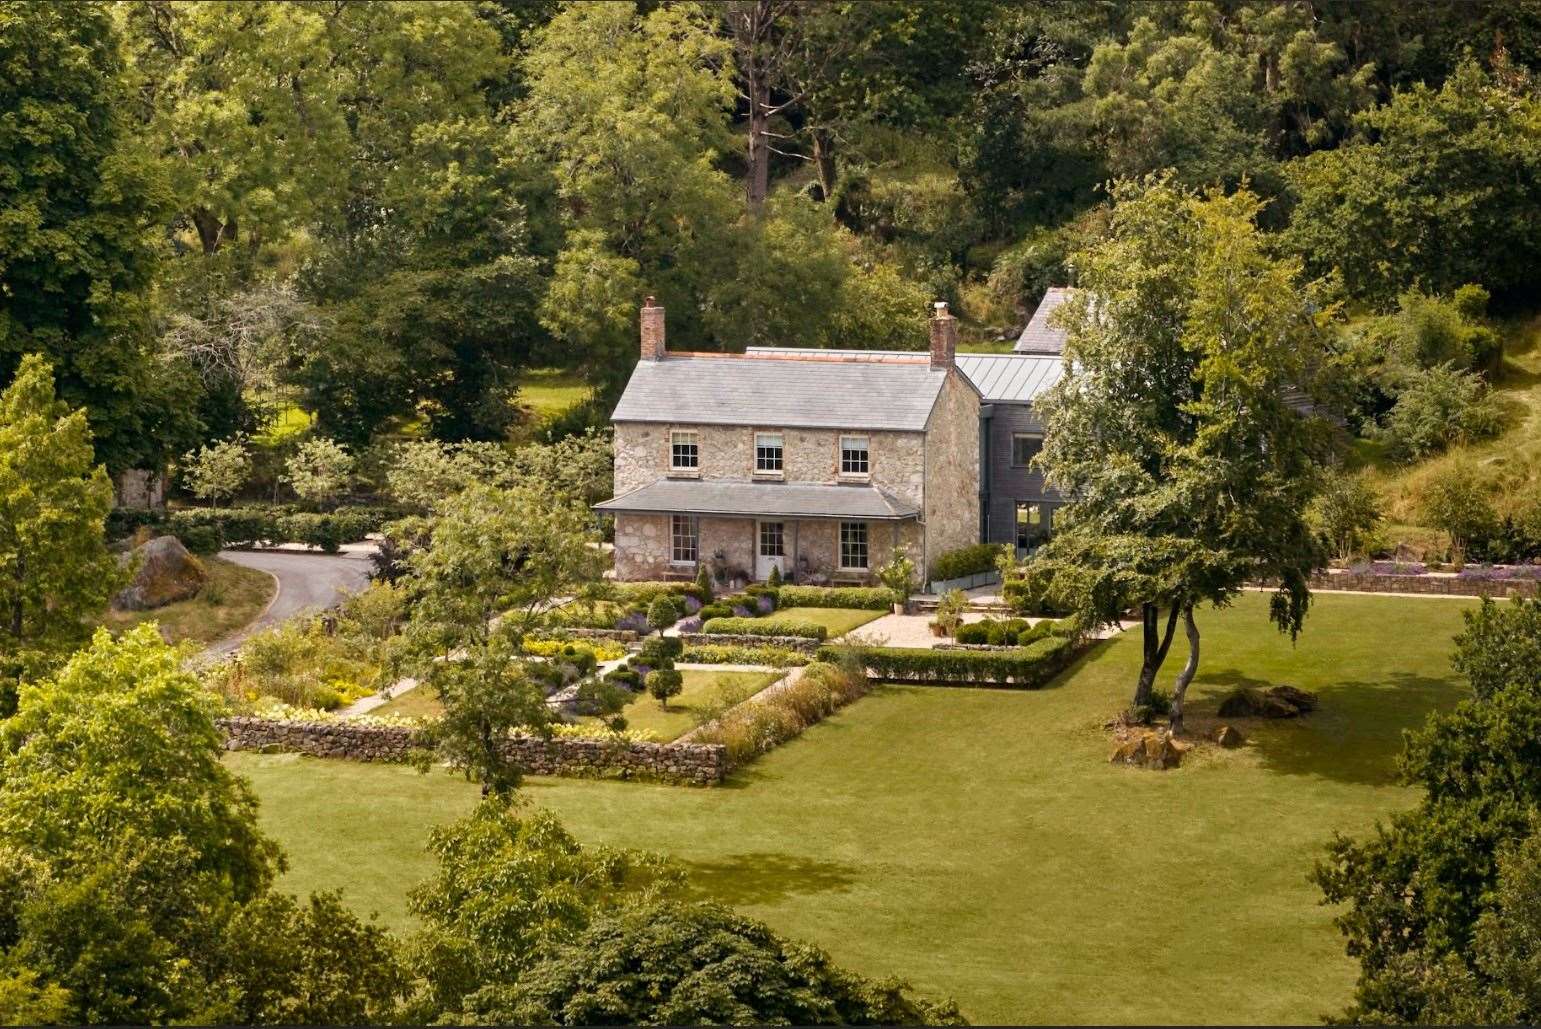 The 5-bedroom property is set near woodland on the edge of Dartmoor National Park. Picture: Omaze